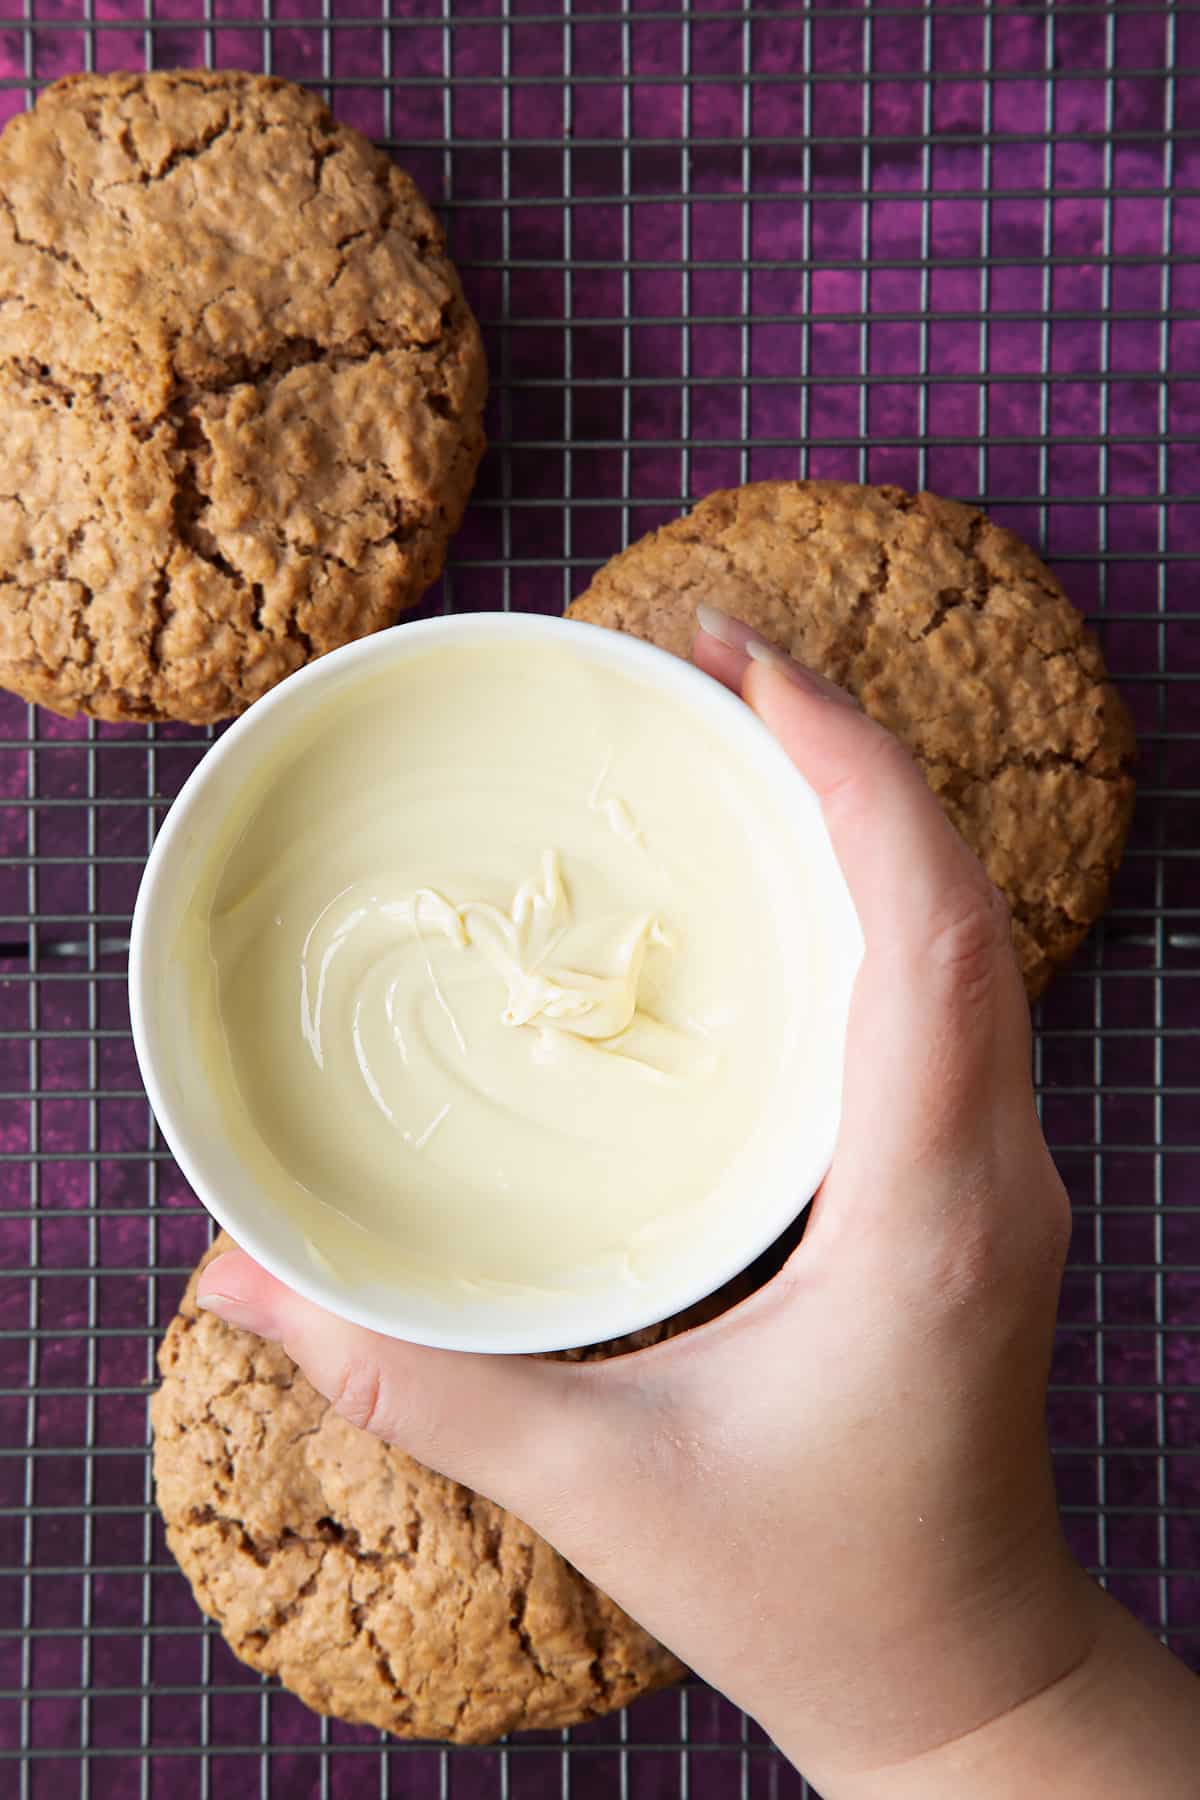 Hand holding a small bowl of melted white chocolate. Below, three undecorated Ferrero Rocher cookies sit on a cooling rack.